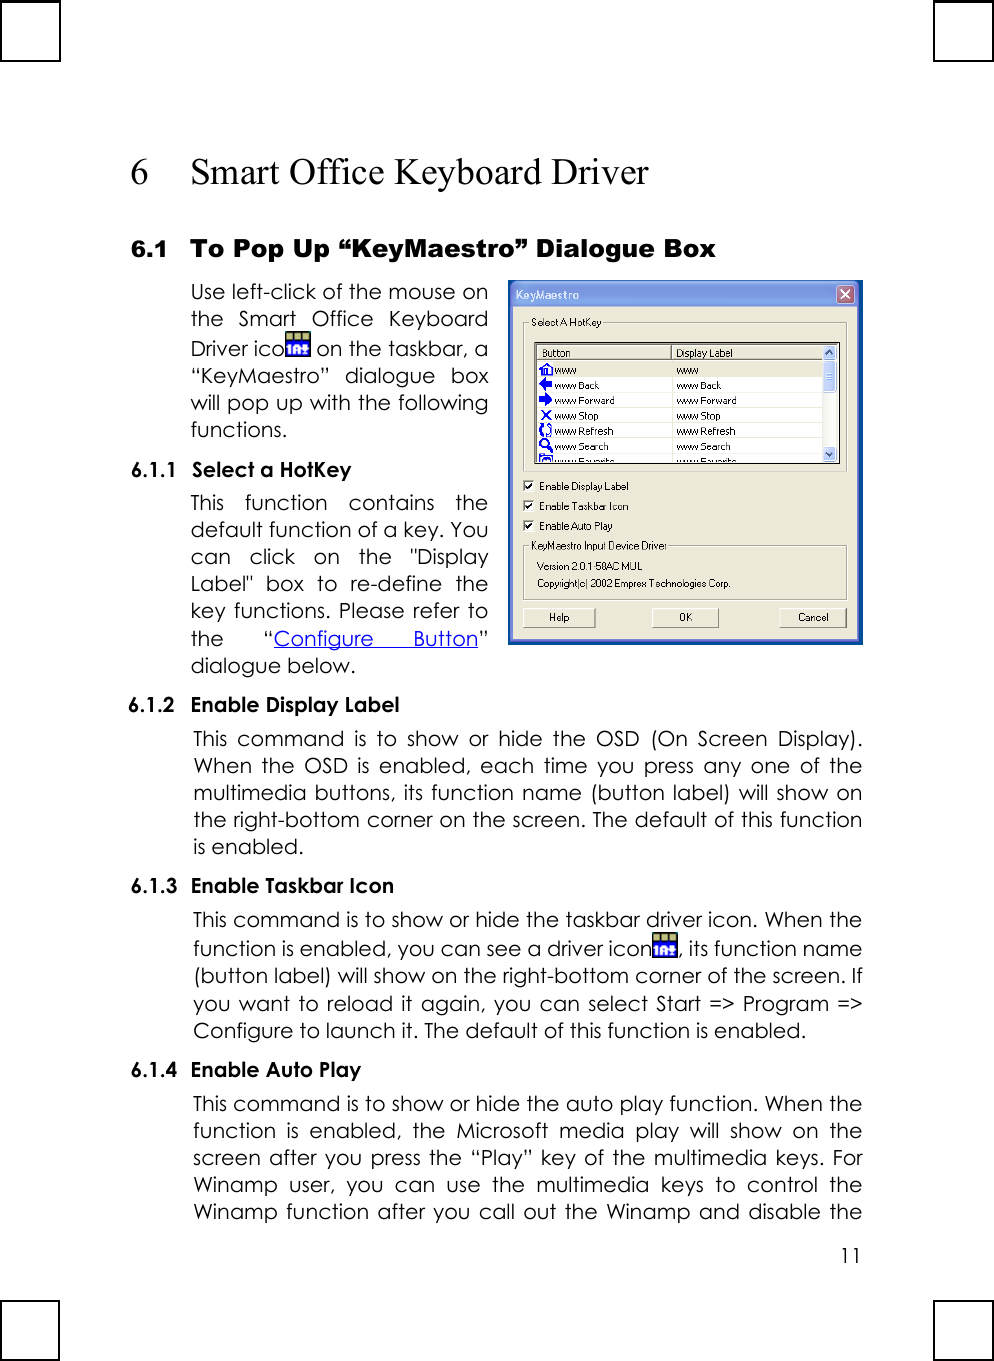 116 Smart Office Keyboard Driver6.1 To Pop Up “KeyMaestro” Dialogue BoxUse left-click of the mouse onthe Smart Office KeyboardDriver ico  on the taskbar, a“KeyMaestro” dialogue boxwill pop up with the followingfunctions.6.1.1 Select a HotKeyThis function contains thedefault function of a key. Youcan click on the &quot;DisplayLabel&quot; box to re-define thekey functions. Please refer tothe “Configure Button”dialogue below.6.1.2 Enable Display LabelThis command is to show or hide the OSD (On Screen Display).When the OSD is enabled, each time you press any one of themultimedia buttons, its function name (button label) will show onthe right-bottom corner on the screen. The default of this functionis enabled.6.1.3 Enable Taskbar IconThis command is to show or hide the taskbar driver icon. When thefunction is enabled, you can see a driver icon , its function name(button label) will show on the right-bottom corner of the screen. Ifyou want to reload it again, you can select Start =&gt; Program =&gt;Configure to launch it. The default of this function is enabled.6.1.4 Enable Auto PlayThis command is to show or hide the auto play function. When thefunction is enabled, the Microsoft media play will show on thescreen after you press the “Play” key of the multimedia keys. ForWinamp user, you can use the multimedia keys to control theWinamp function after you call out the Winamp and disable the